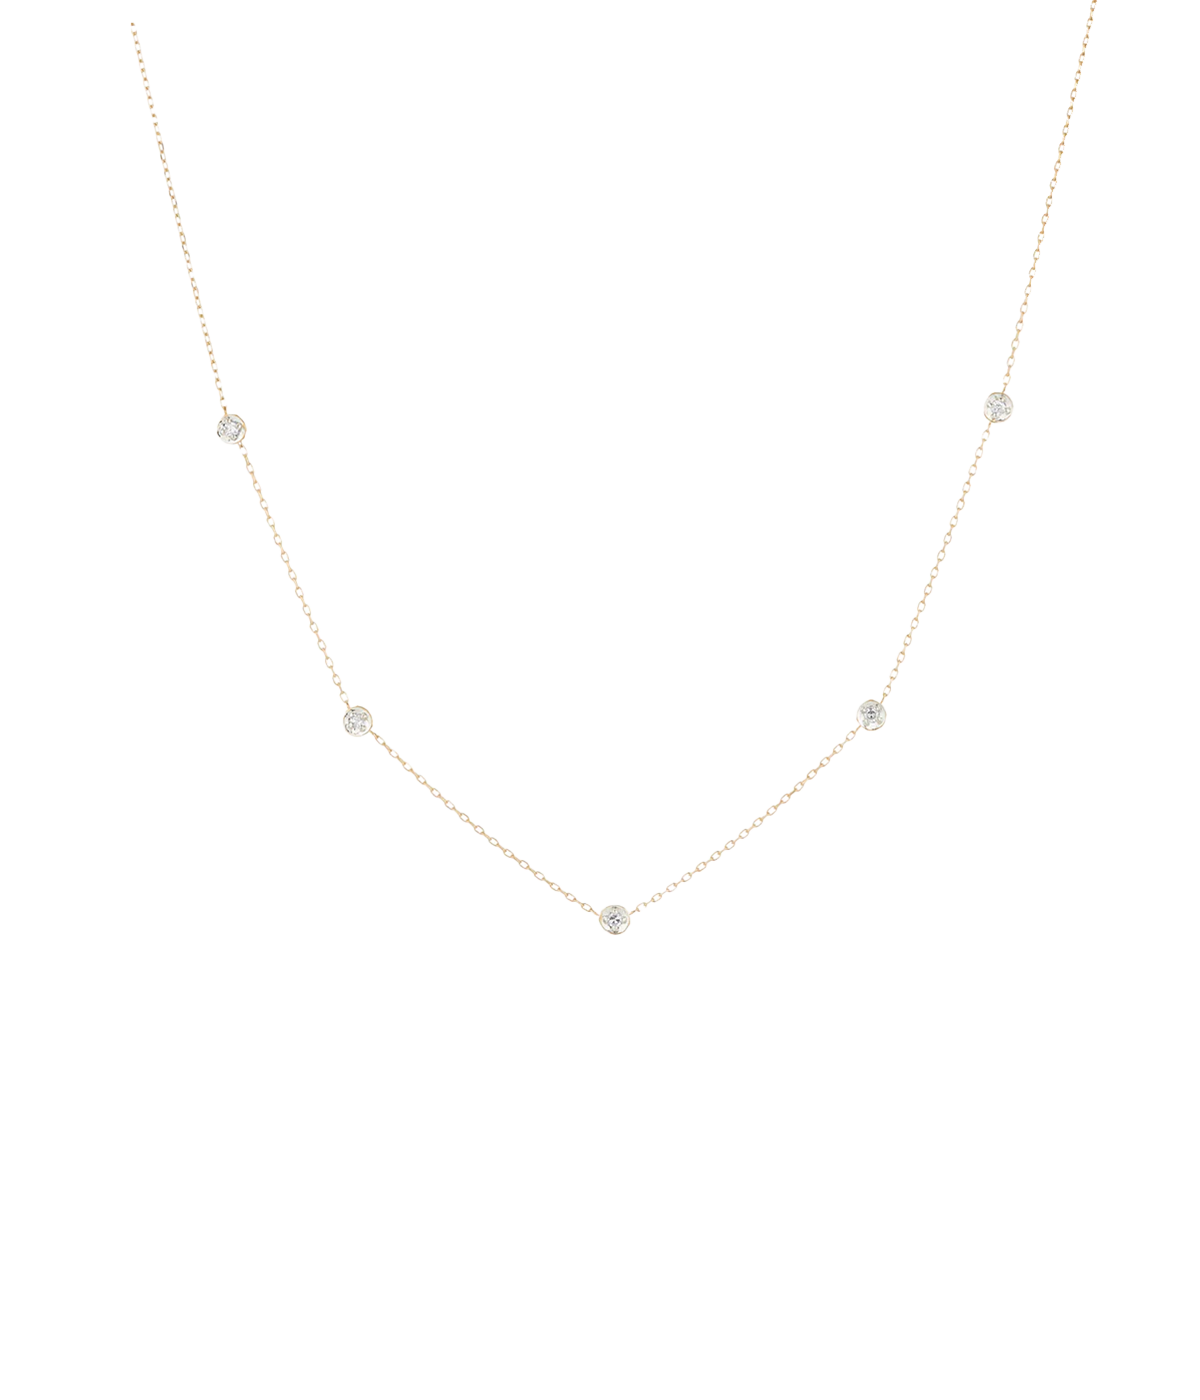 Five Diamond Chain Necklace in 14K Yellow Gold